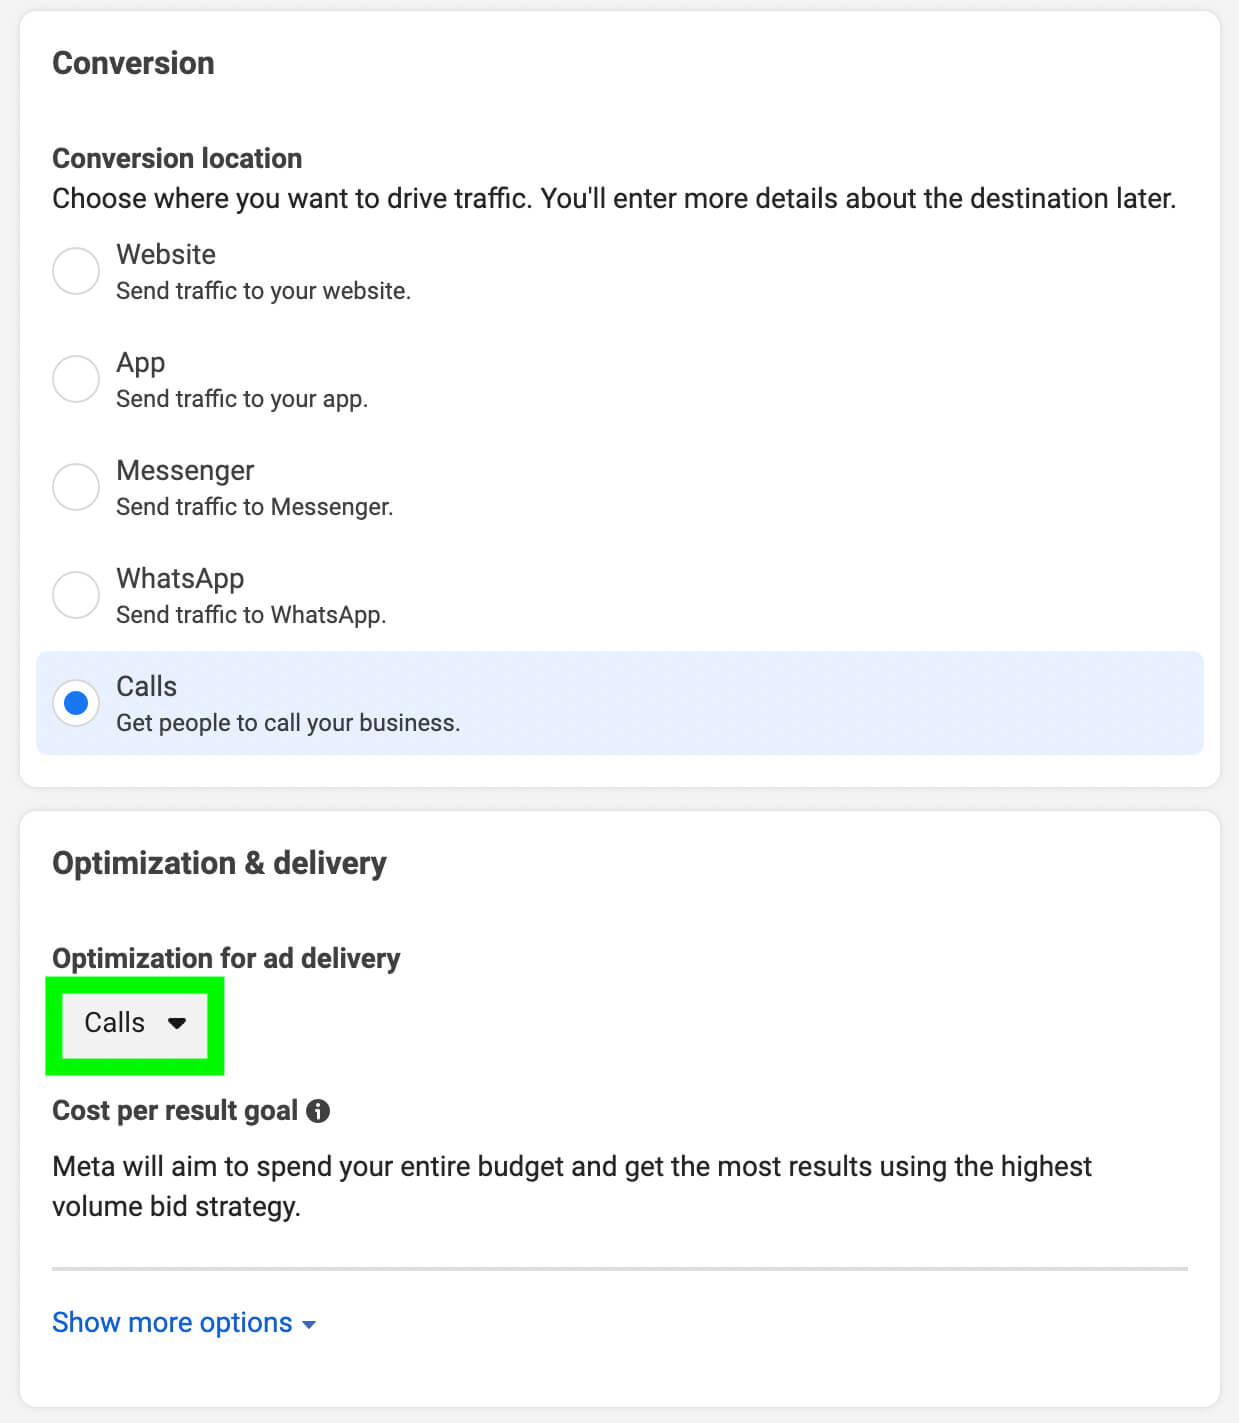 how-to-optimize-meta-call-ads-for-sixty-second-calls-conversion-location-optimization-and-delivery-section-example-8